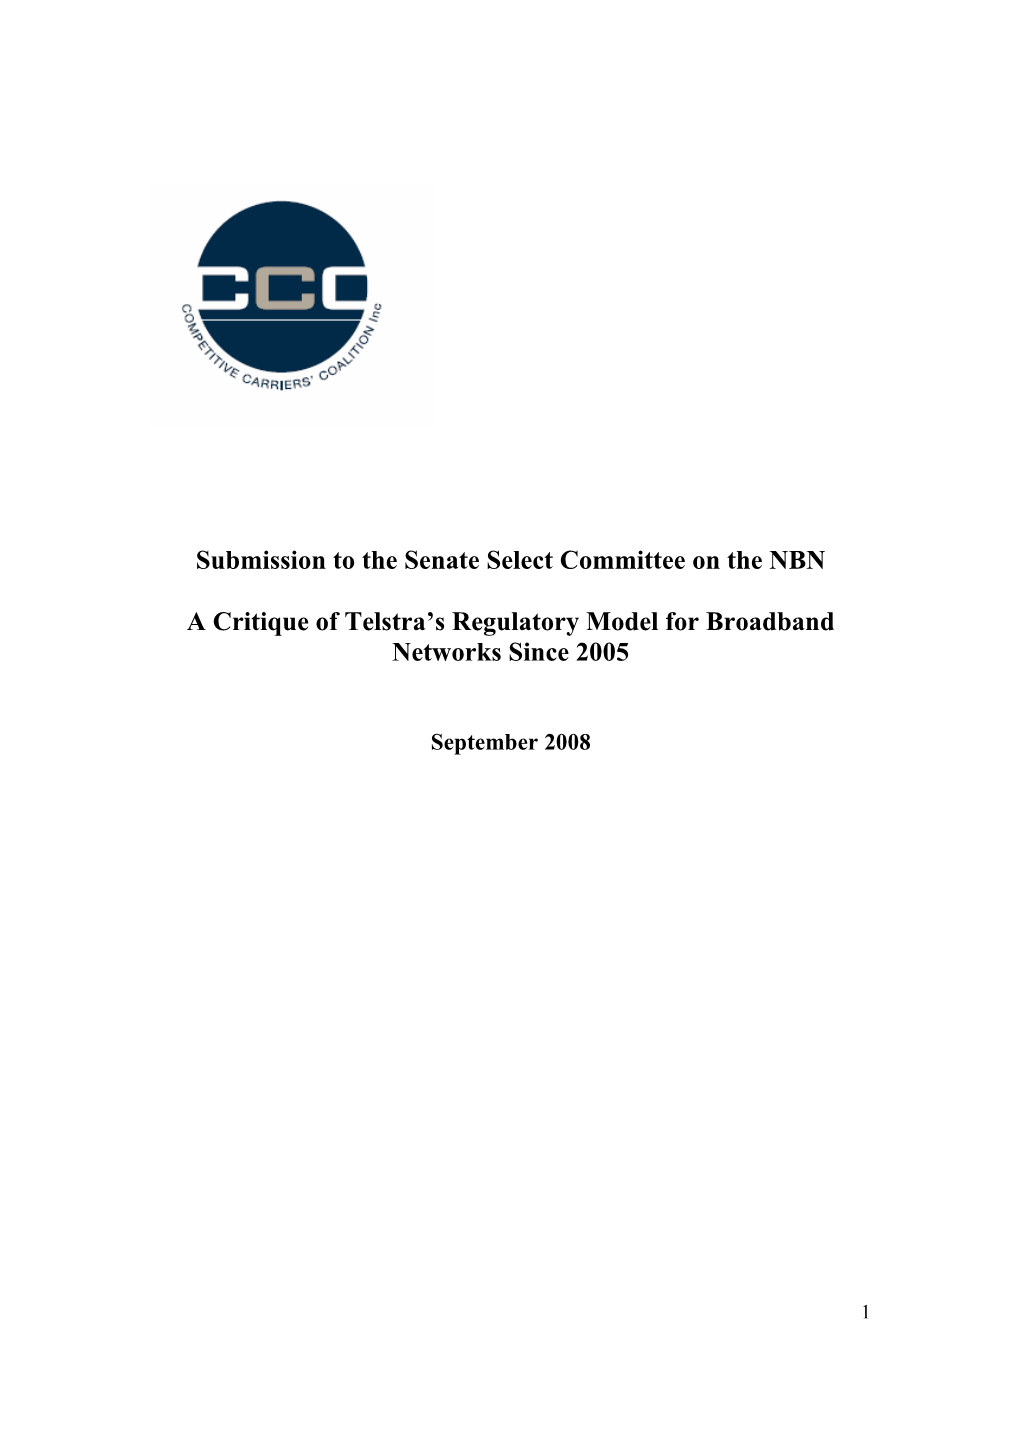 Submission: Senate Select Committee on the National Broadband Network